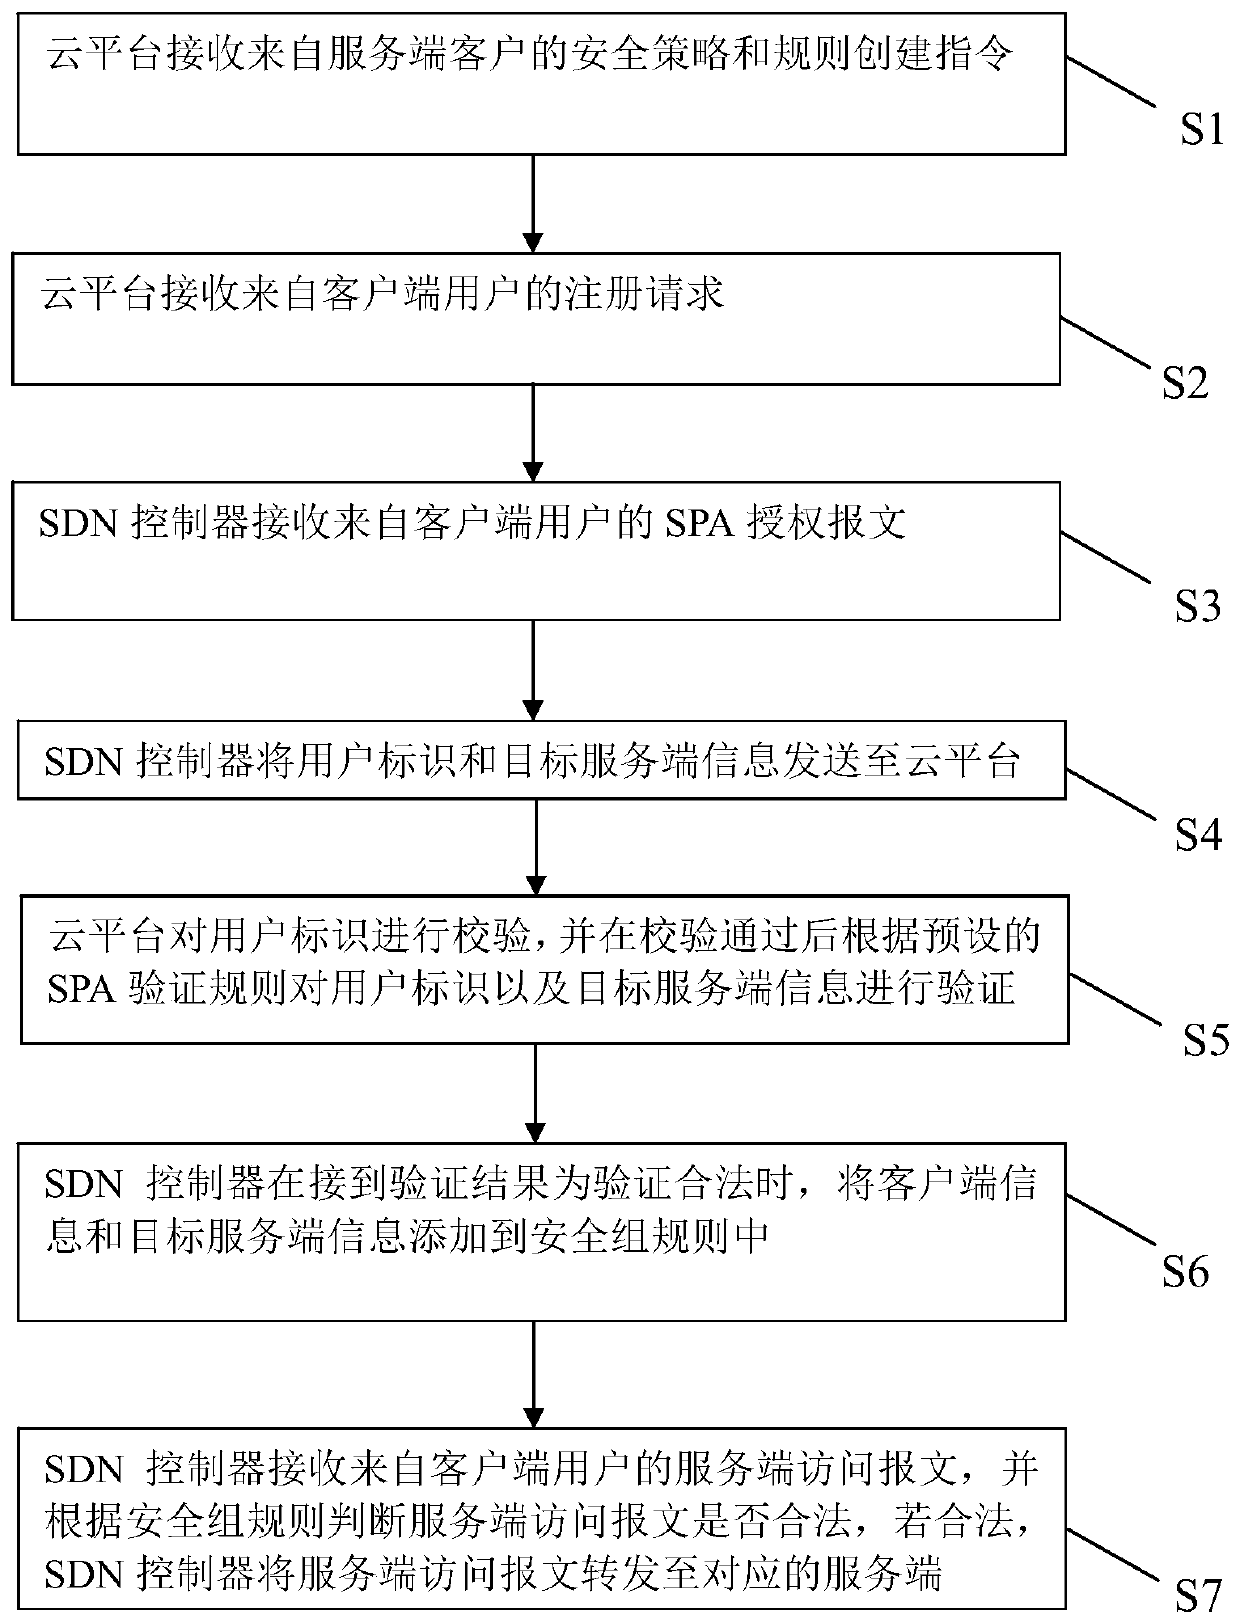 SDN-based SDP security group implementation method and security system